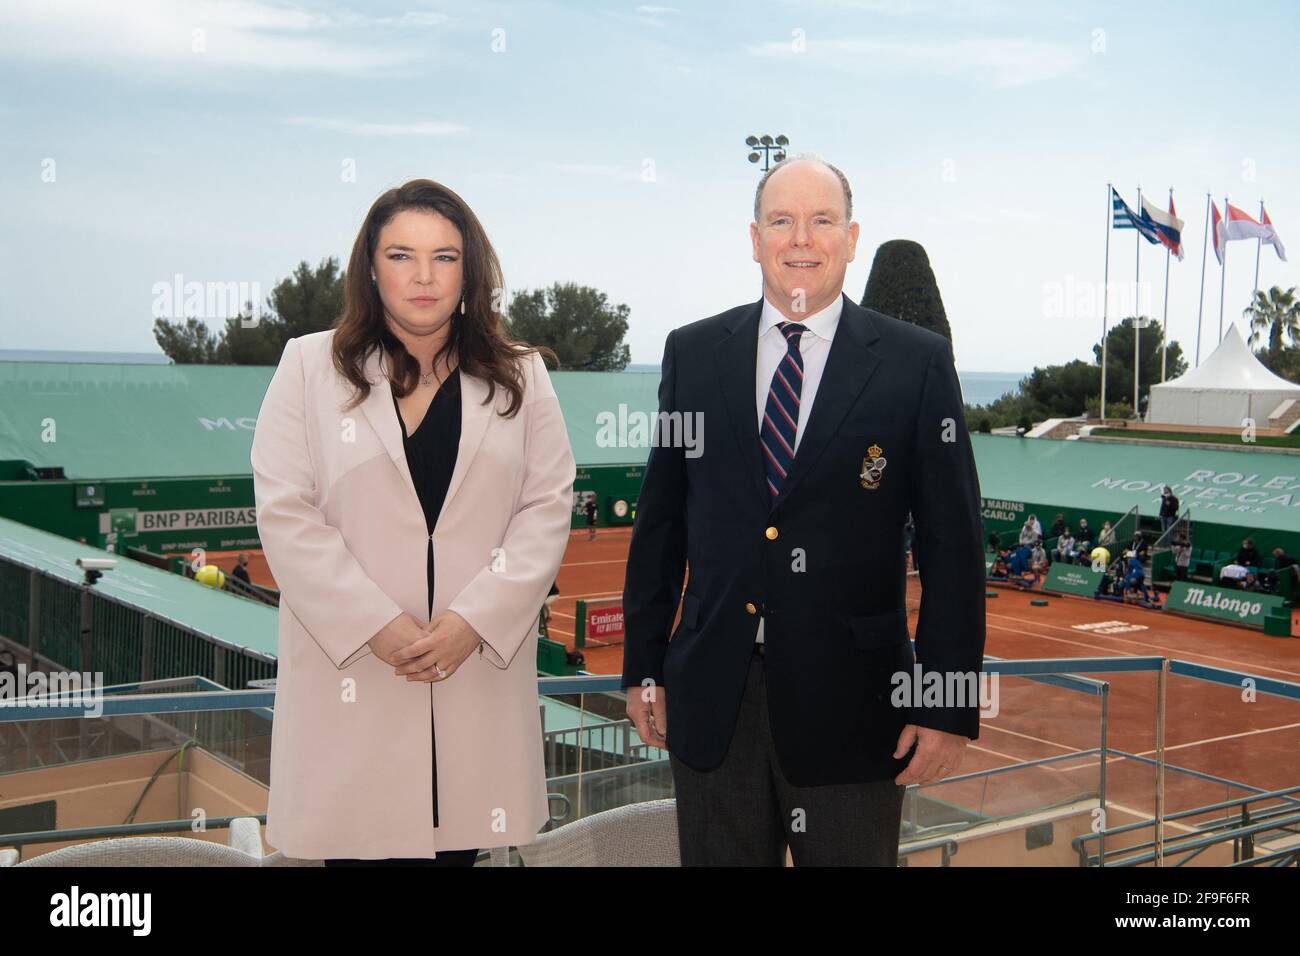 Prince Albert II of Monaco and Melanie-Antoinette Costello de Massy,  President of the Monegasque Tennis Federation attend the men's singles  final during the Rolex Monte-Carlo Masters at Monte-Carlo Country Club on  April